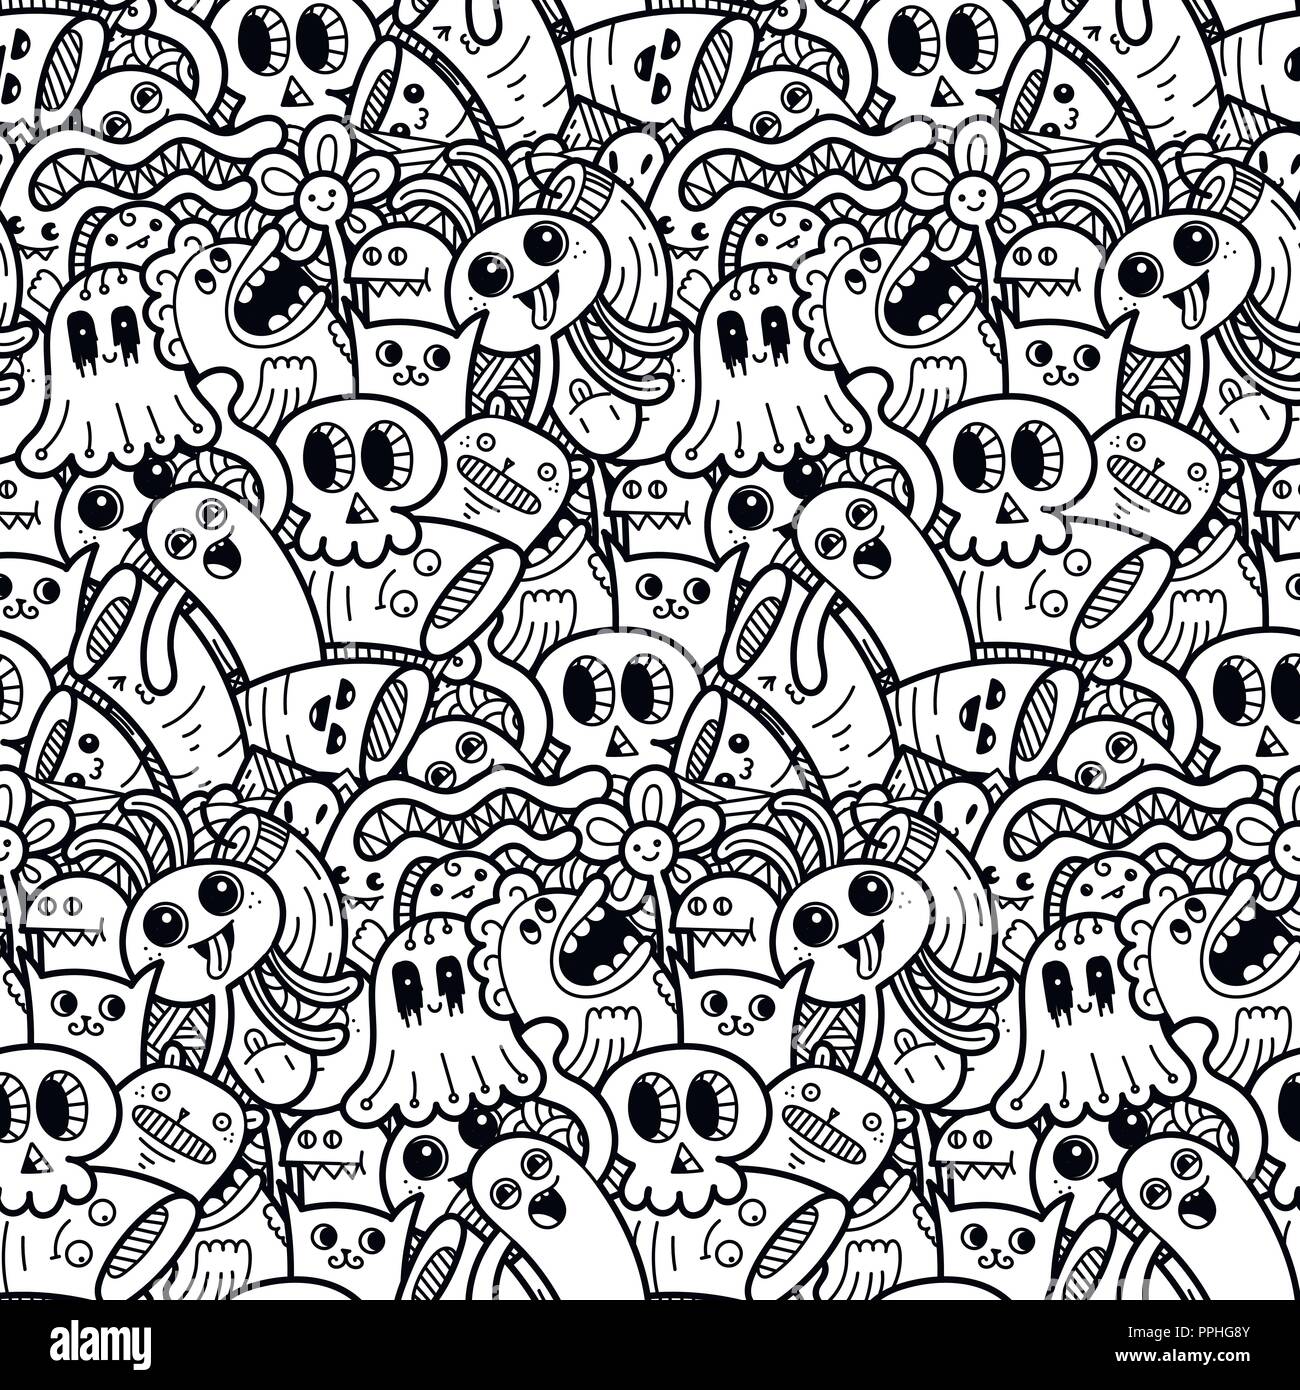 17 Doodle Monster Coloring Pages - Free Printable Coloring Pages